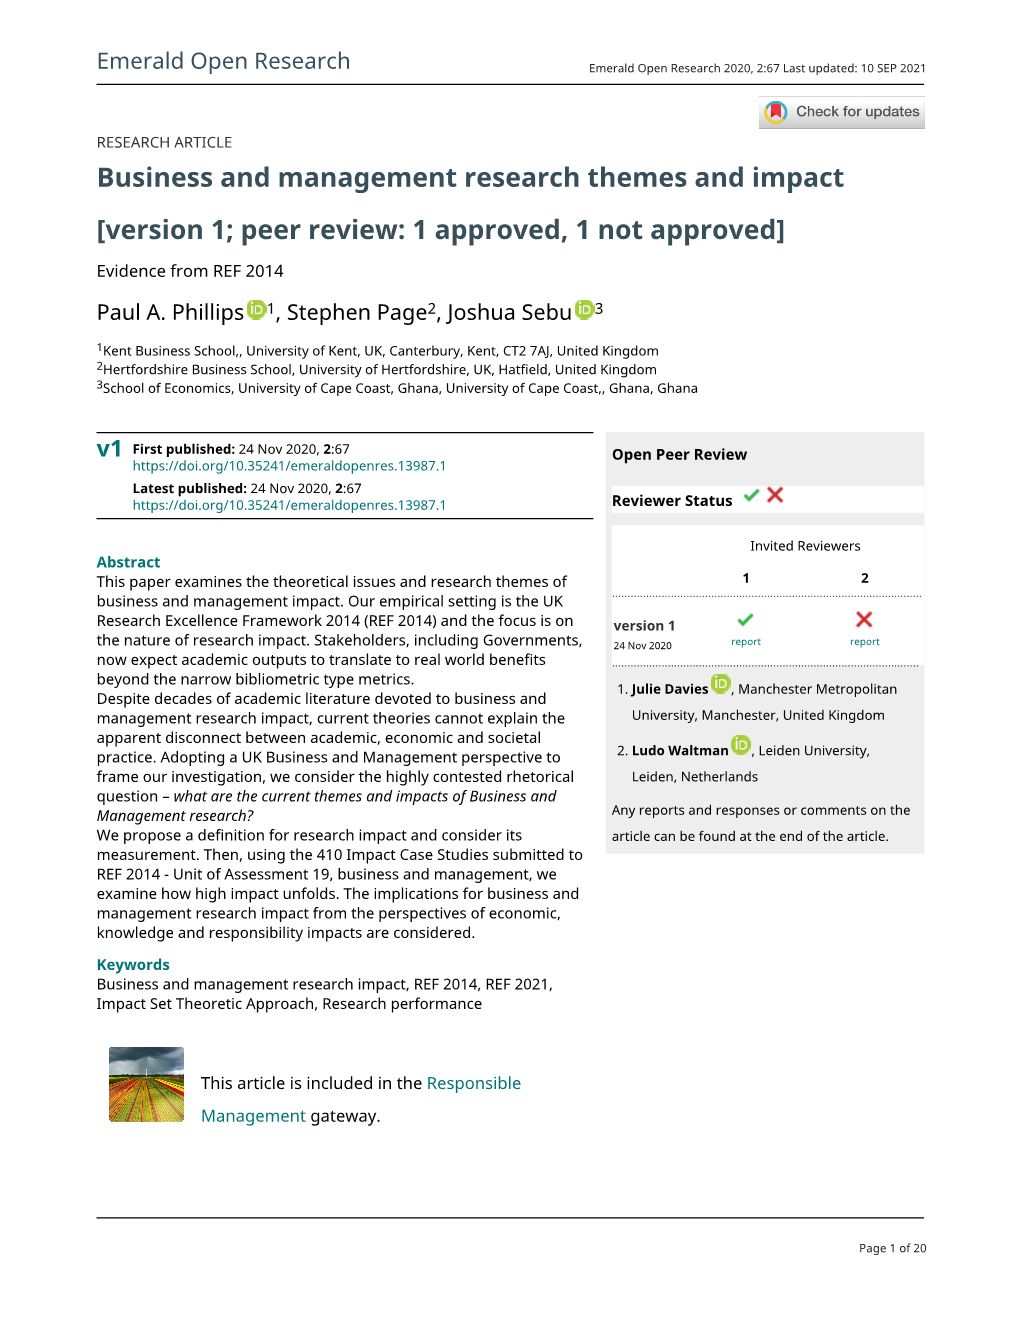 Business and Management Research Themes and Impact [Version 1; Peer Review: 1 Approved, 1 Not Approved]